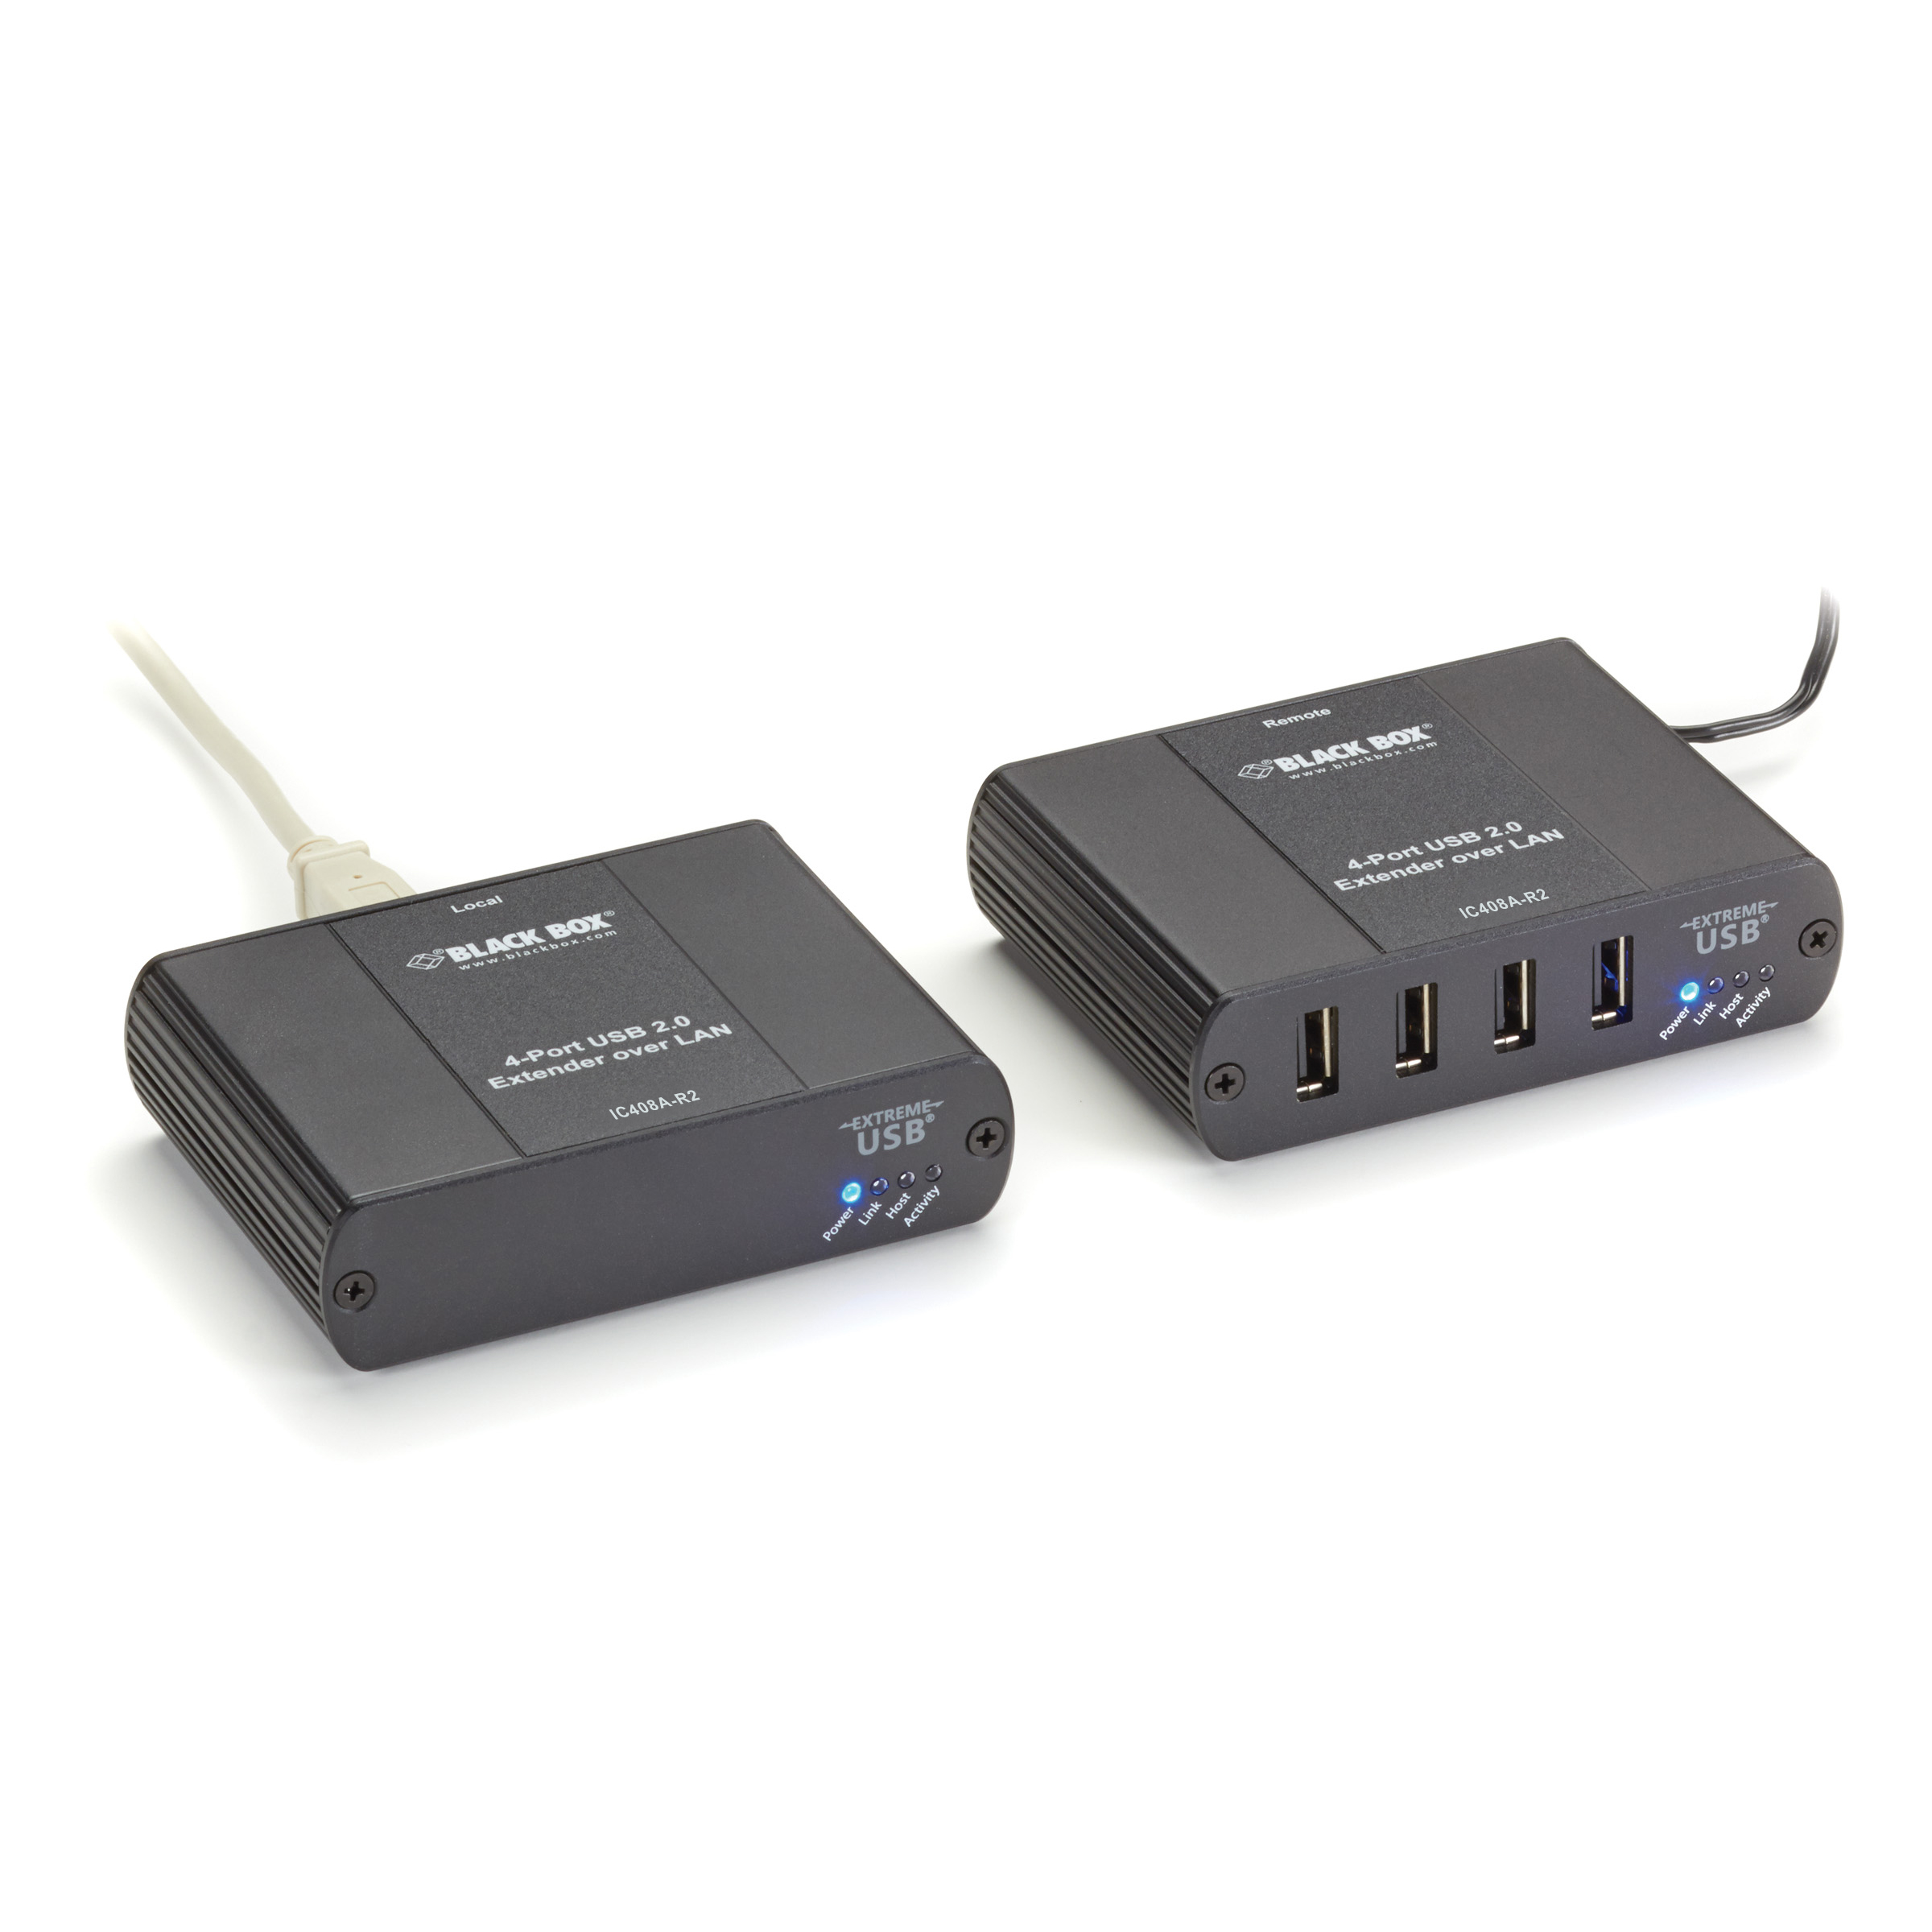 stilhed Barry Perpetual Black Box IC408A-R2 USB Extender | Free Shipping